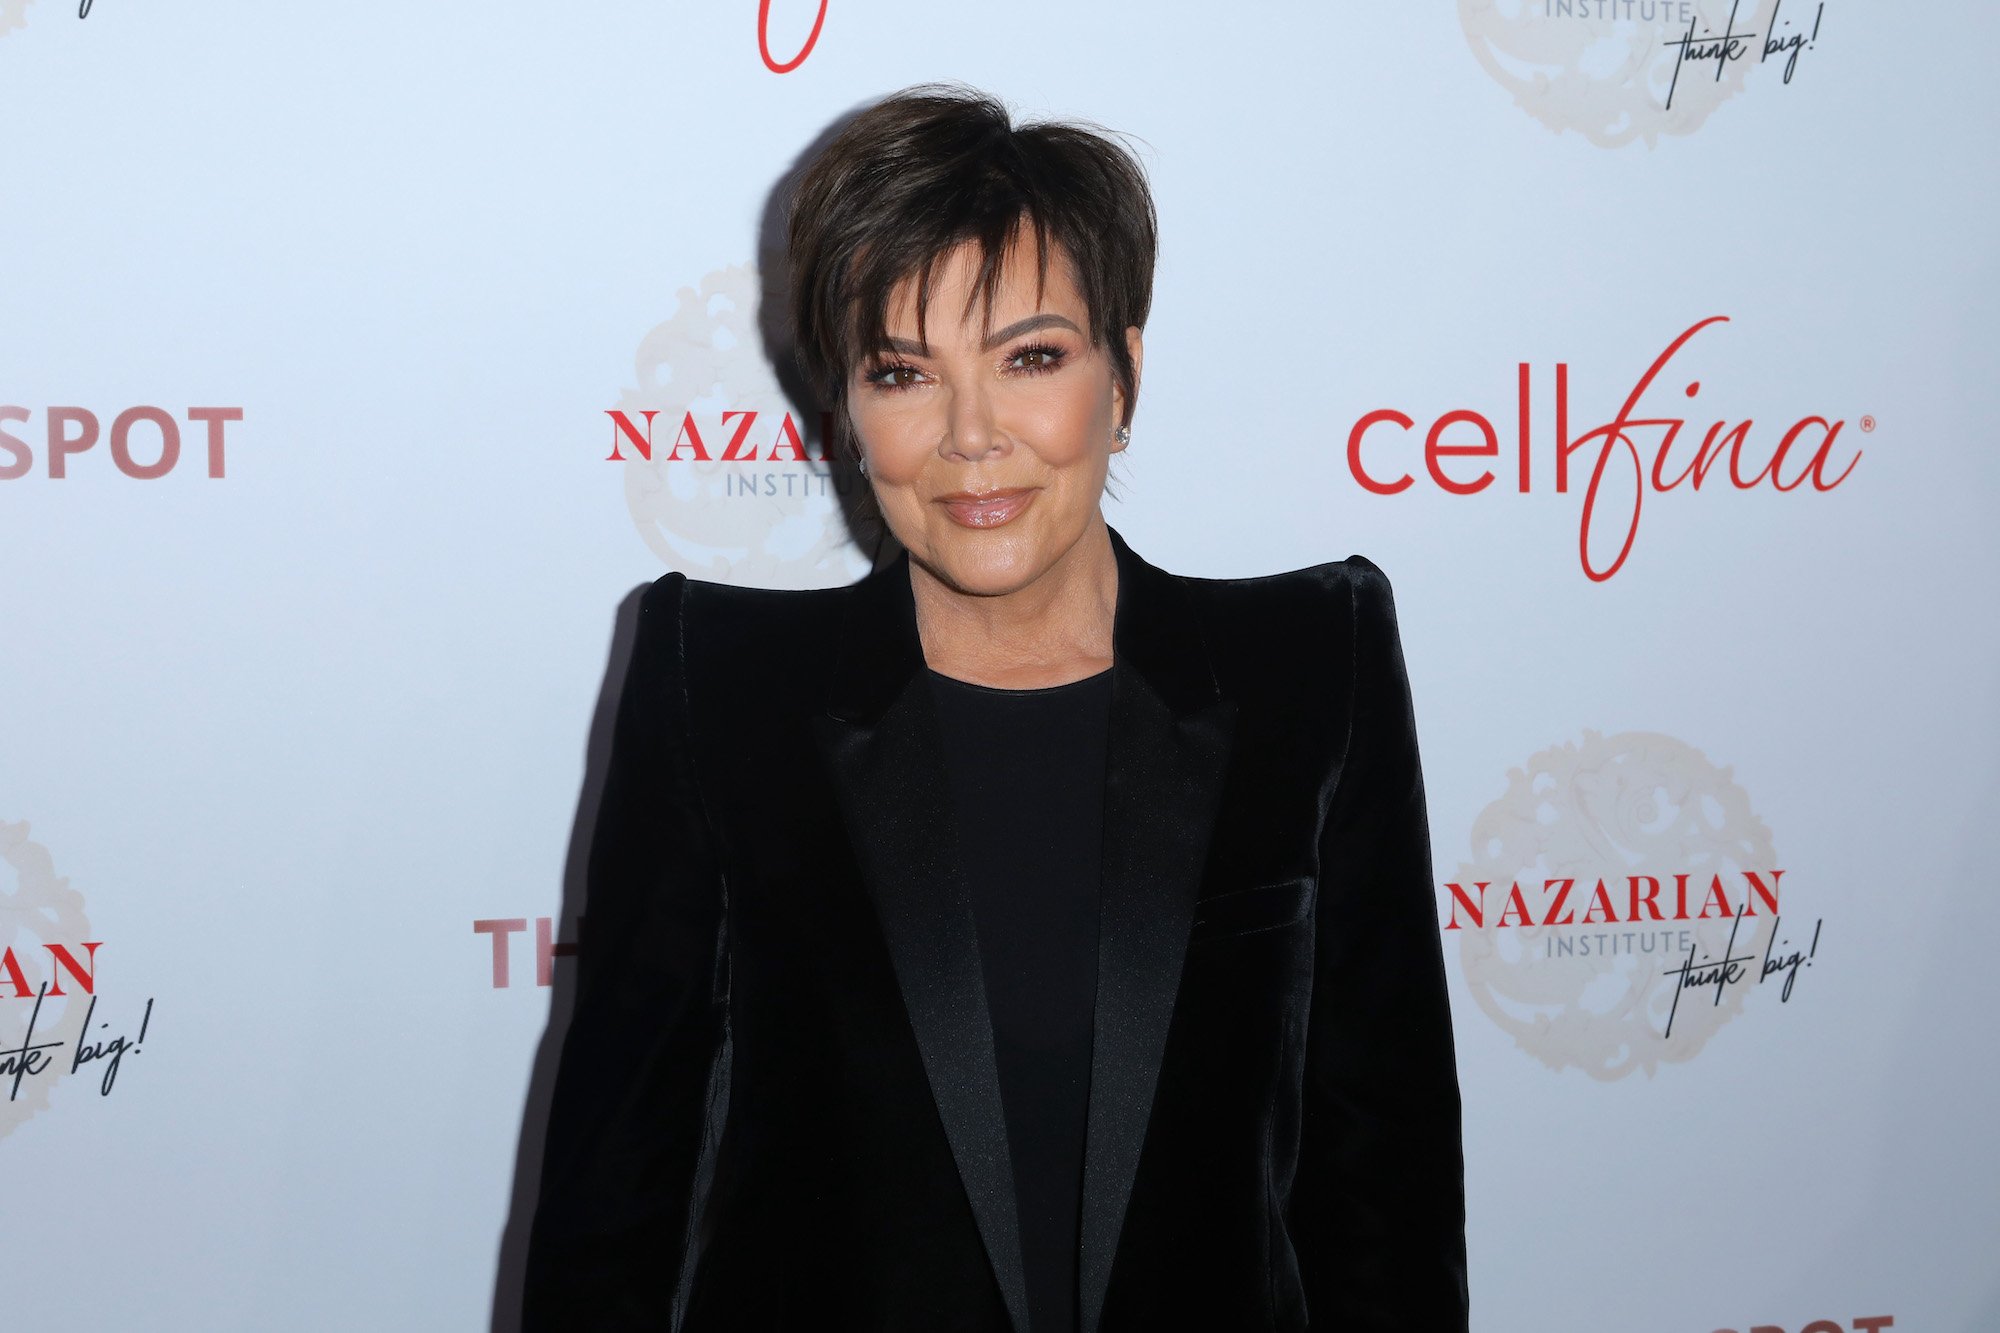 Why Kris Jenner’s Role as a Momager Makes Her Feel Like a ‘Fireman’